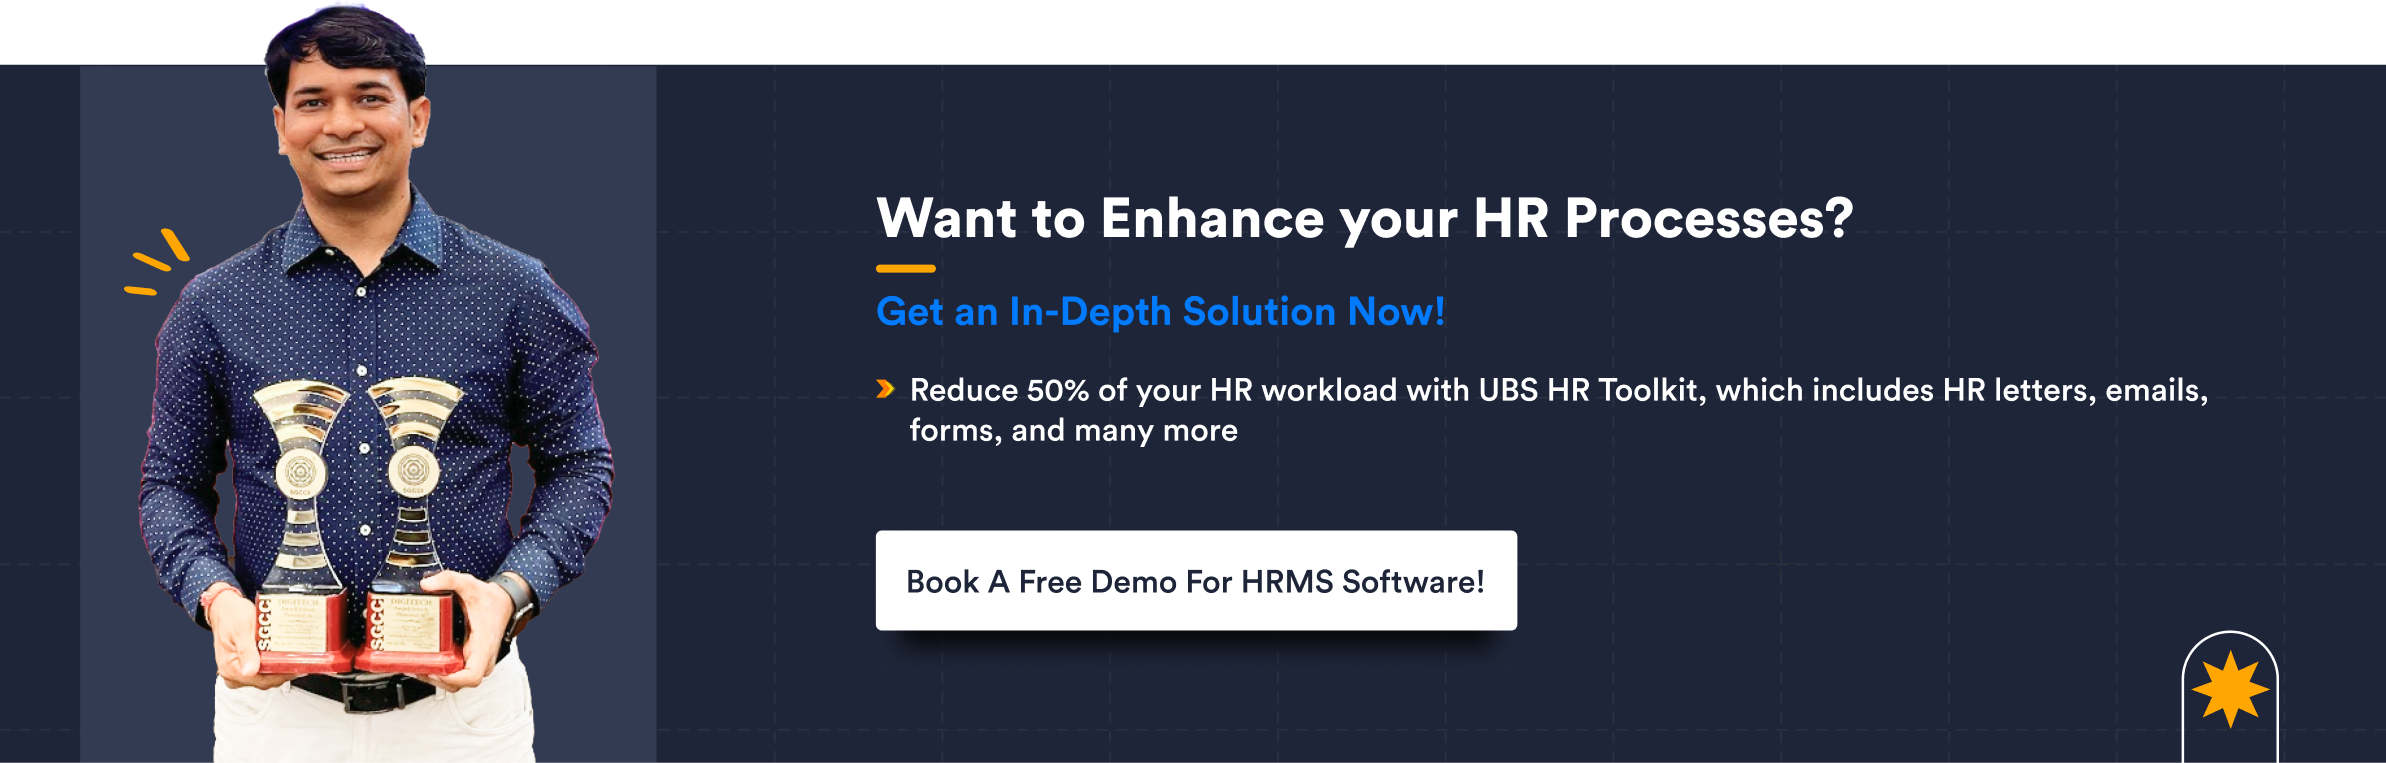 Want to Enhance your HR Processes 4